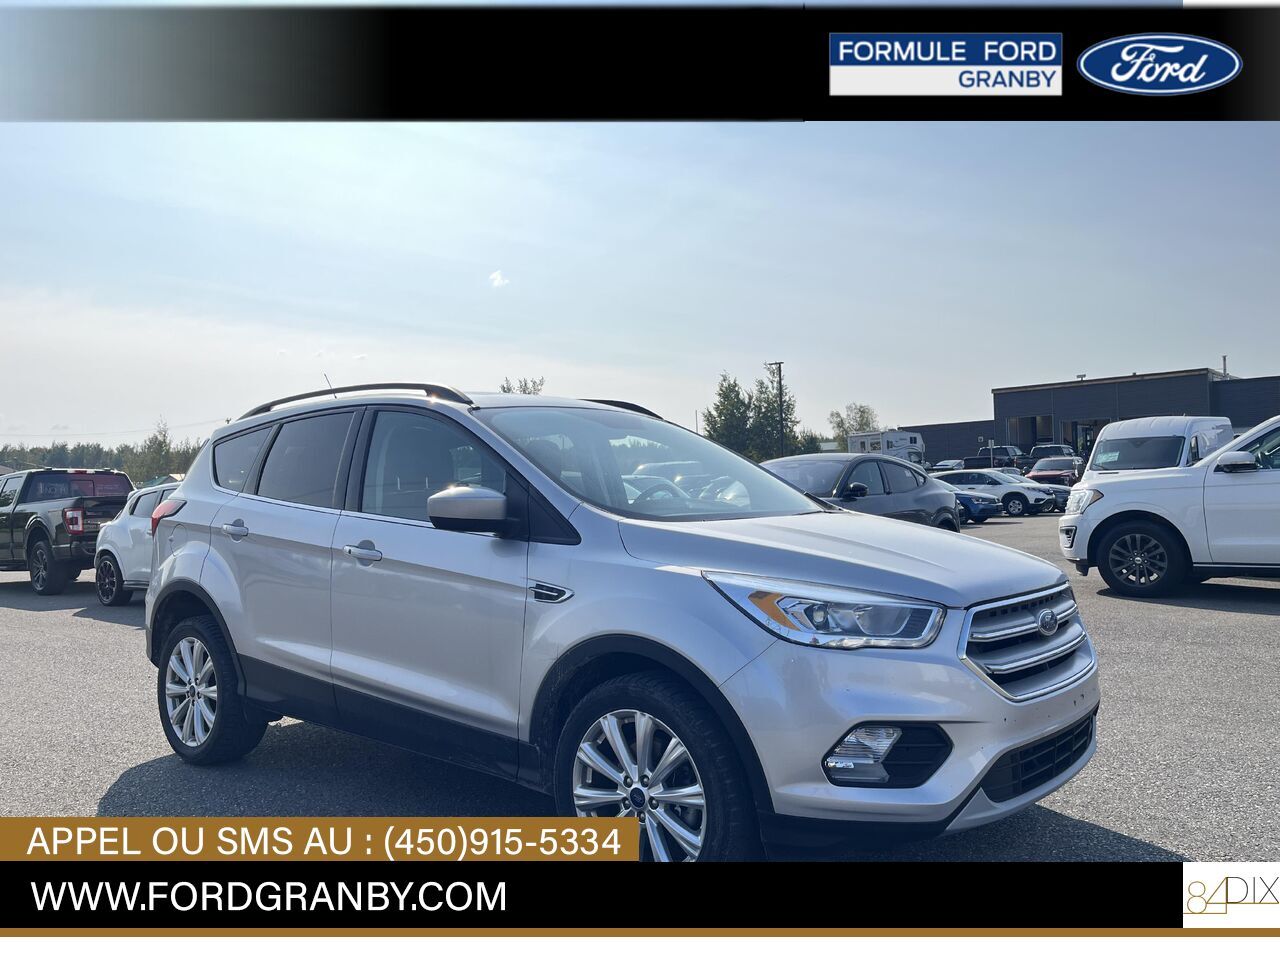 2019 Ford Escape SEL AWD TOIT OUVRANT PANO MAGS 18